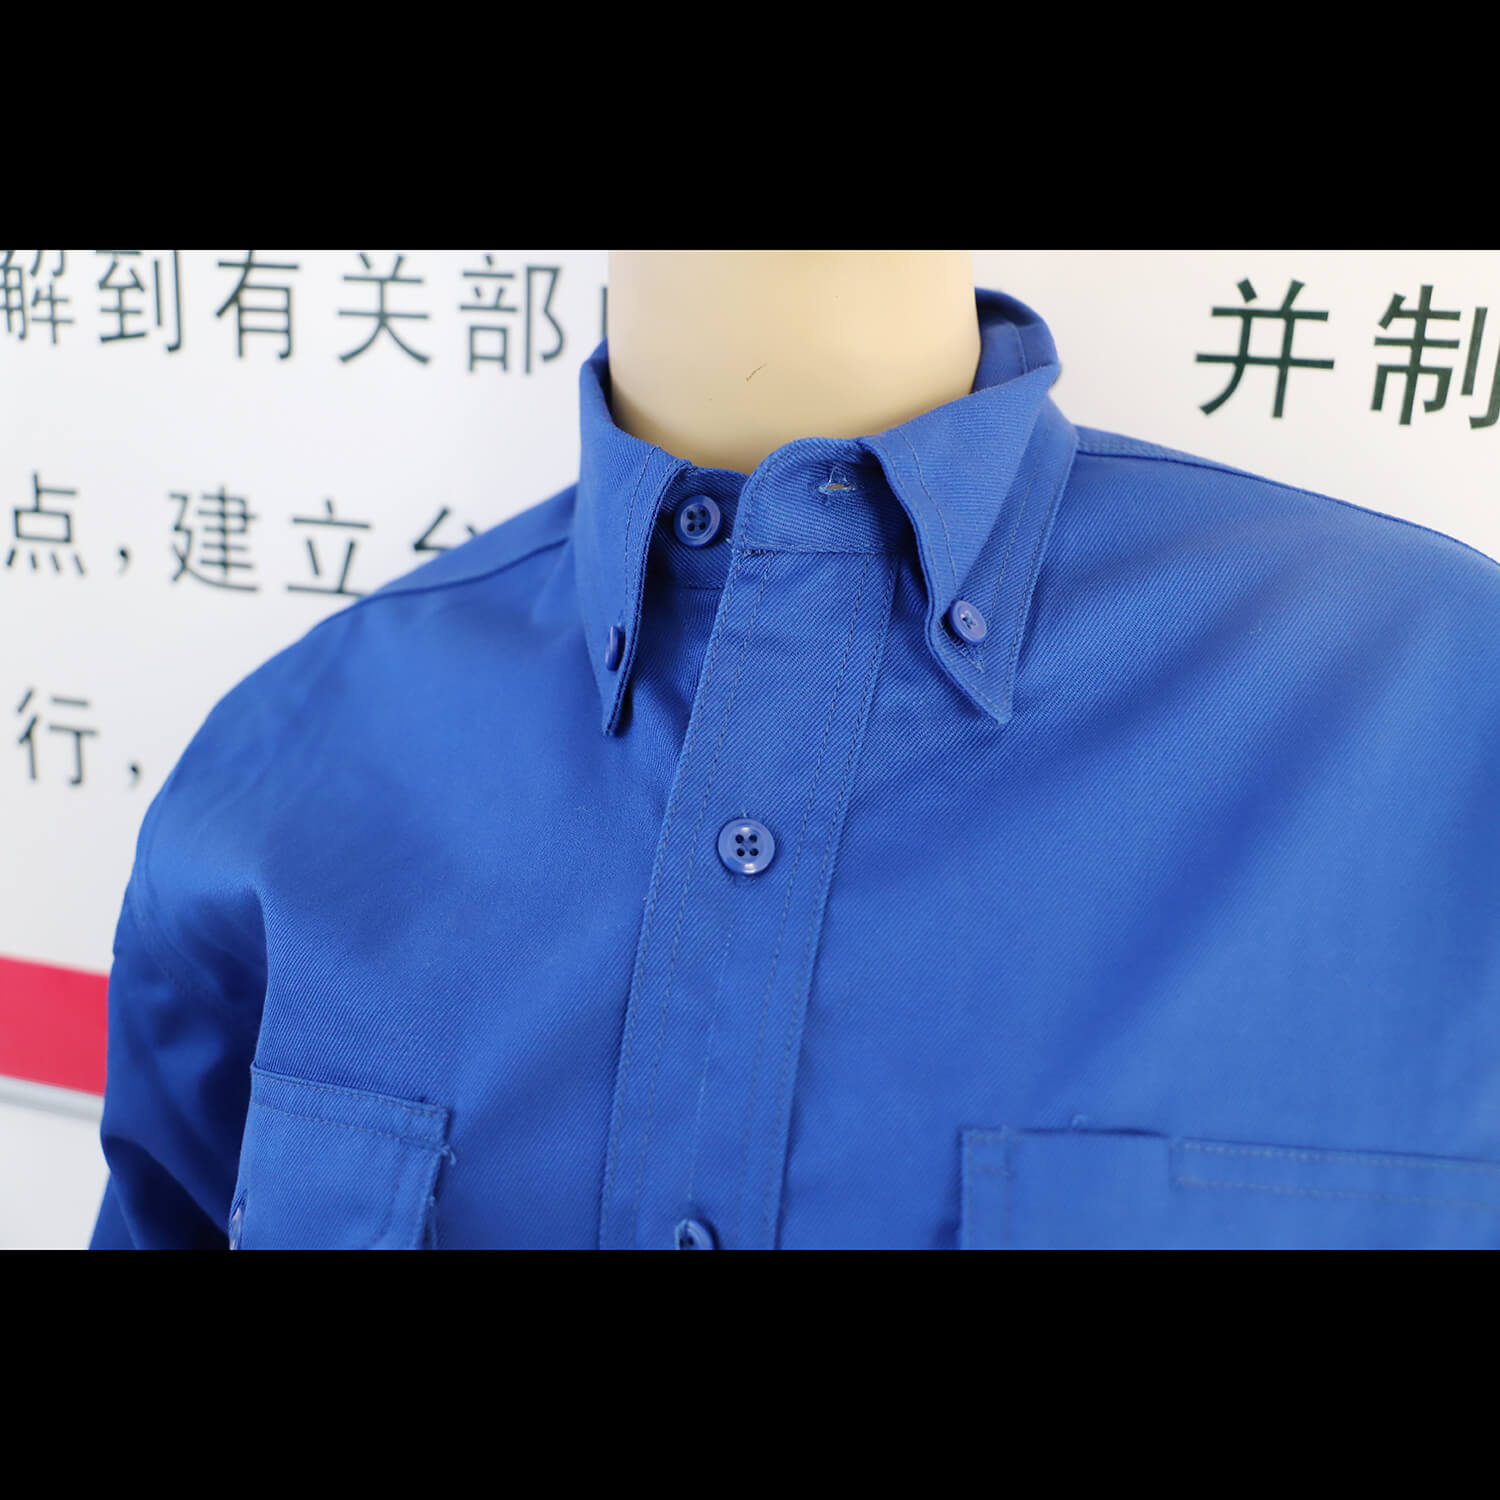 Blue Working clothes